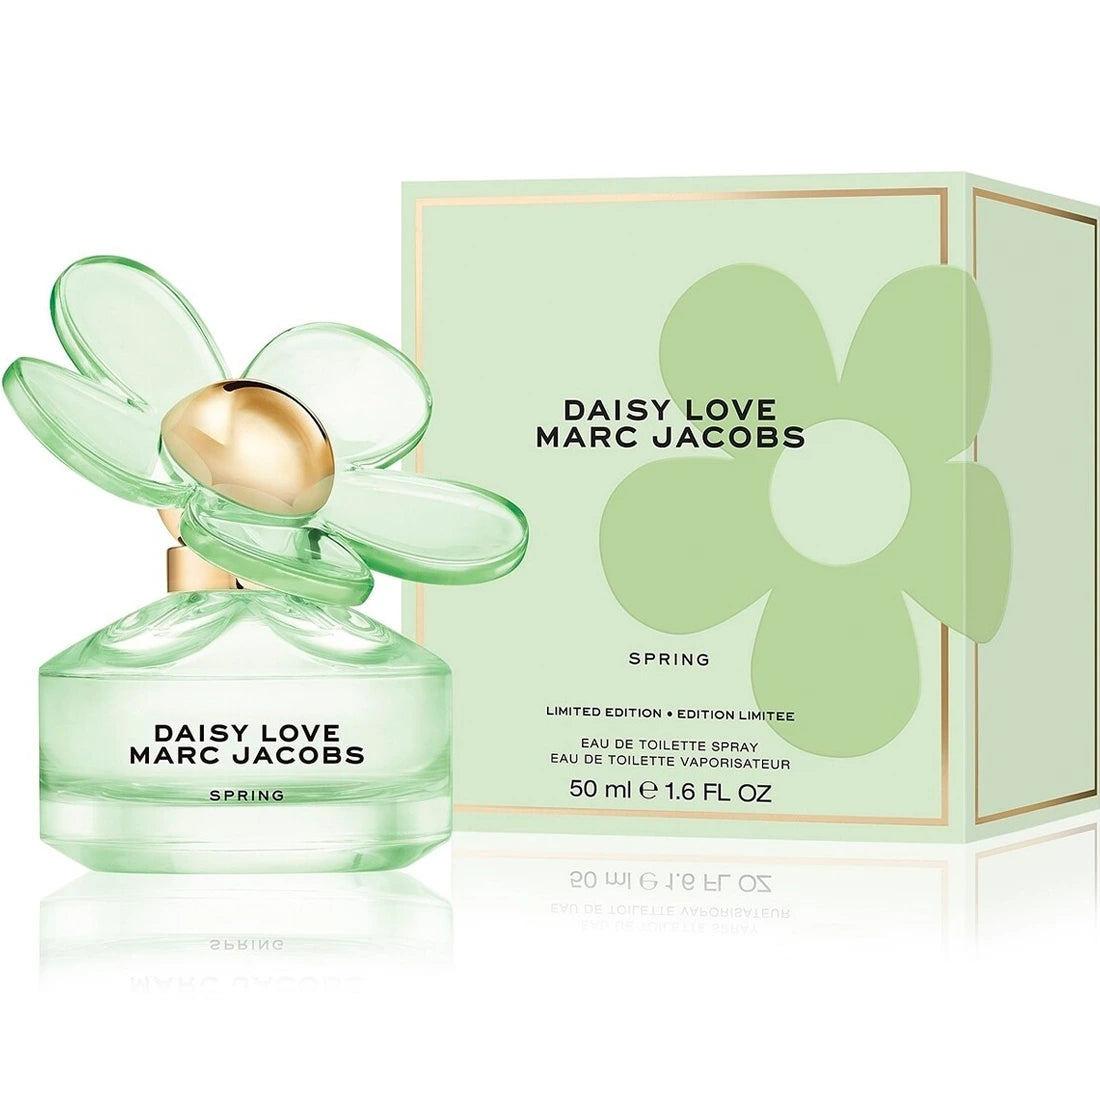 <span data-mce-fragment="1">Fresh. Uplifting. Vibrant. Capturing the airy essence of nature and the innocence of spring, the Daisy Spring limited editions are a seasonal twist on the classic Daisy fragrances. MARC JACOBS Daisy Love Spring is a feminine scent, with delicate pink peony wrapped in the sweet and creamy smoothness of fig and fig milk. Transport yourself to a world of blooming daisies and lush greenery with the MARC JACOBS Daisy Spring limited-edition perfumes.</span>